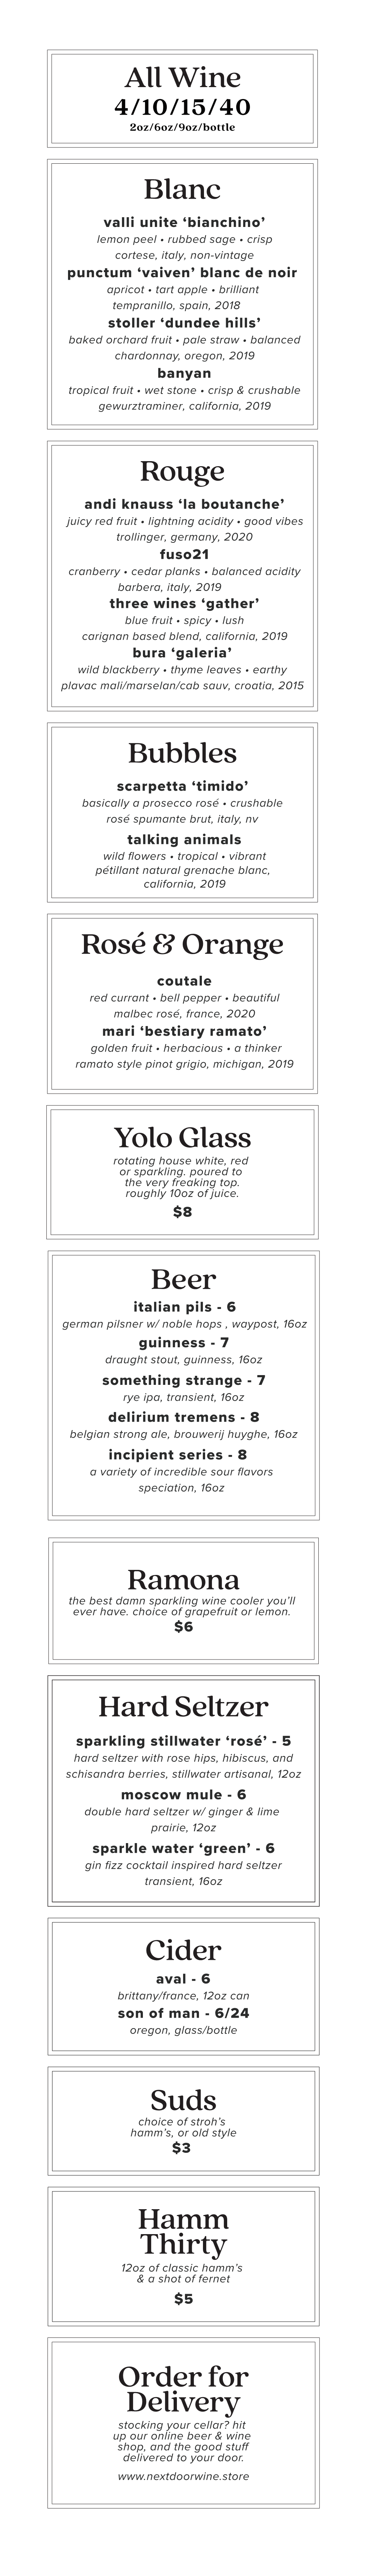 Blanc Rosé & Orange Rouge Bubbles All Wine Yolo Glass Order For